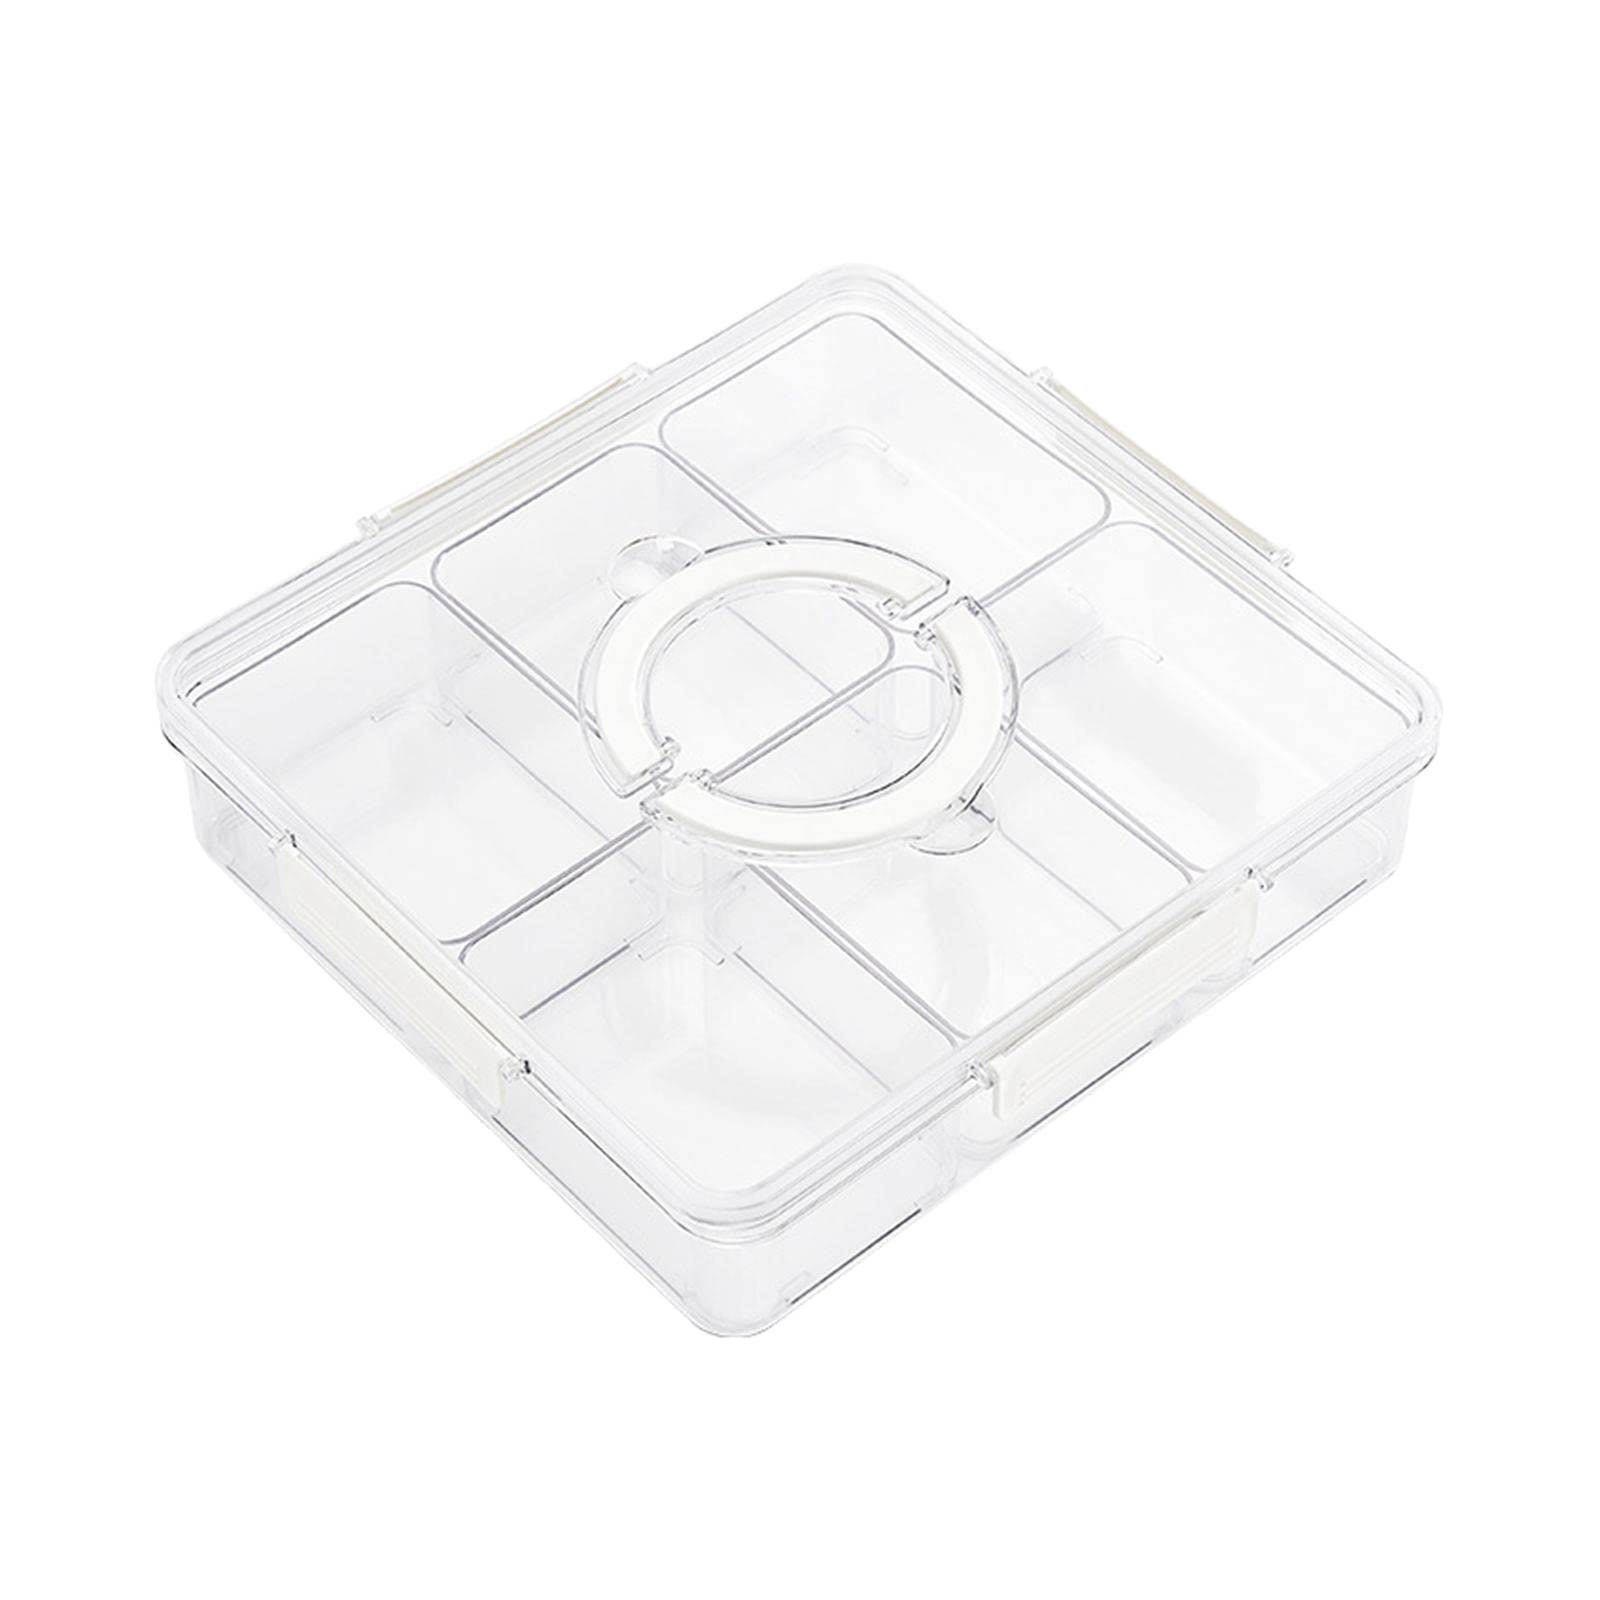 ＫＬＫＣＭＳ Snack Container Divided Food Storage Container Clear 6 Grids with Handle Lid, Divided Seasoning Box, Dried Fruit Plate for nuts Cookies